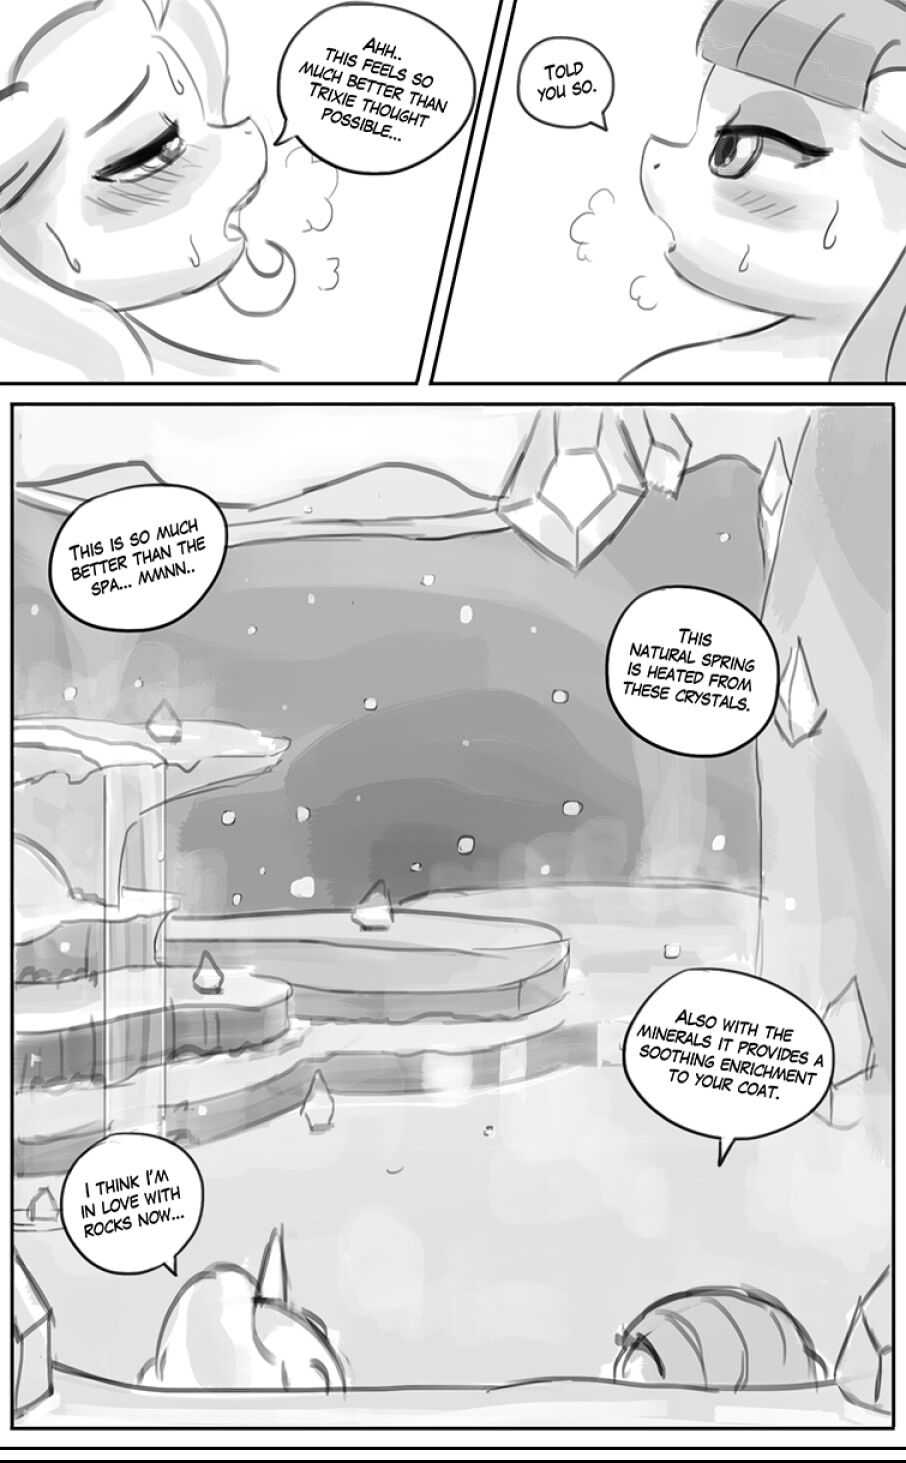 Homesick Part 2: Hearth's Warming Eve - Page 11